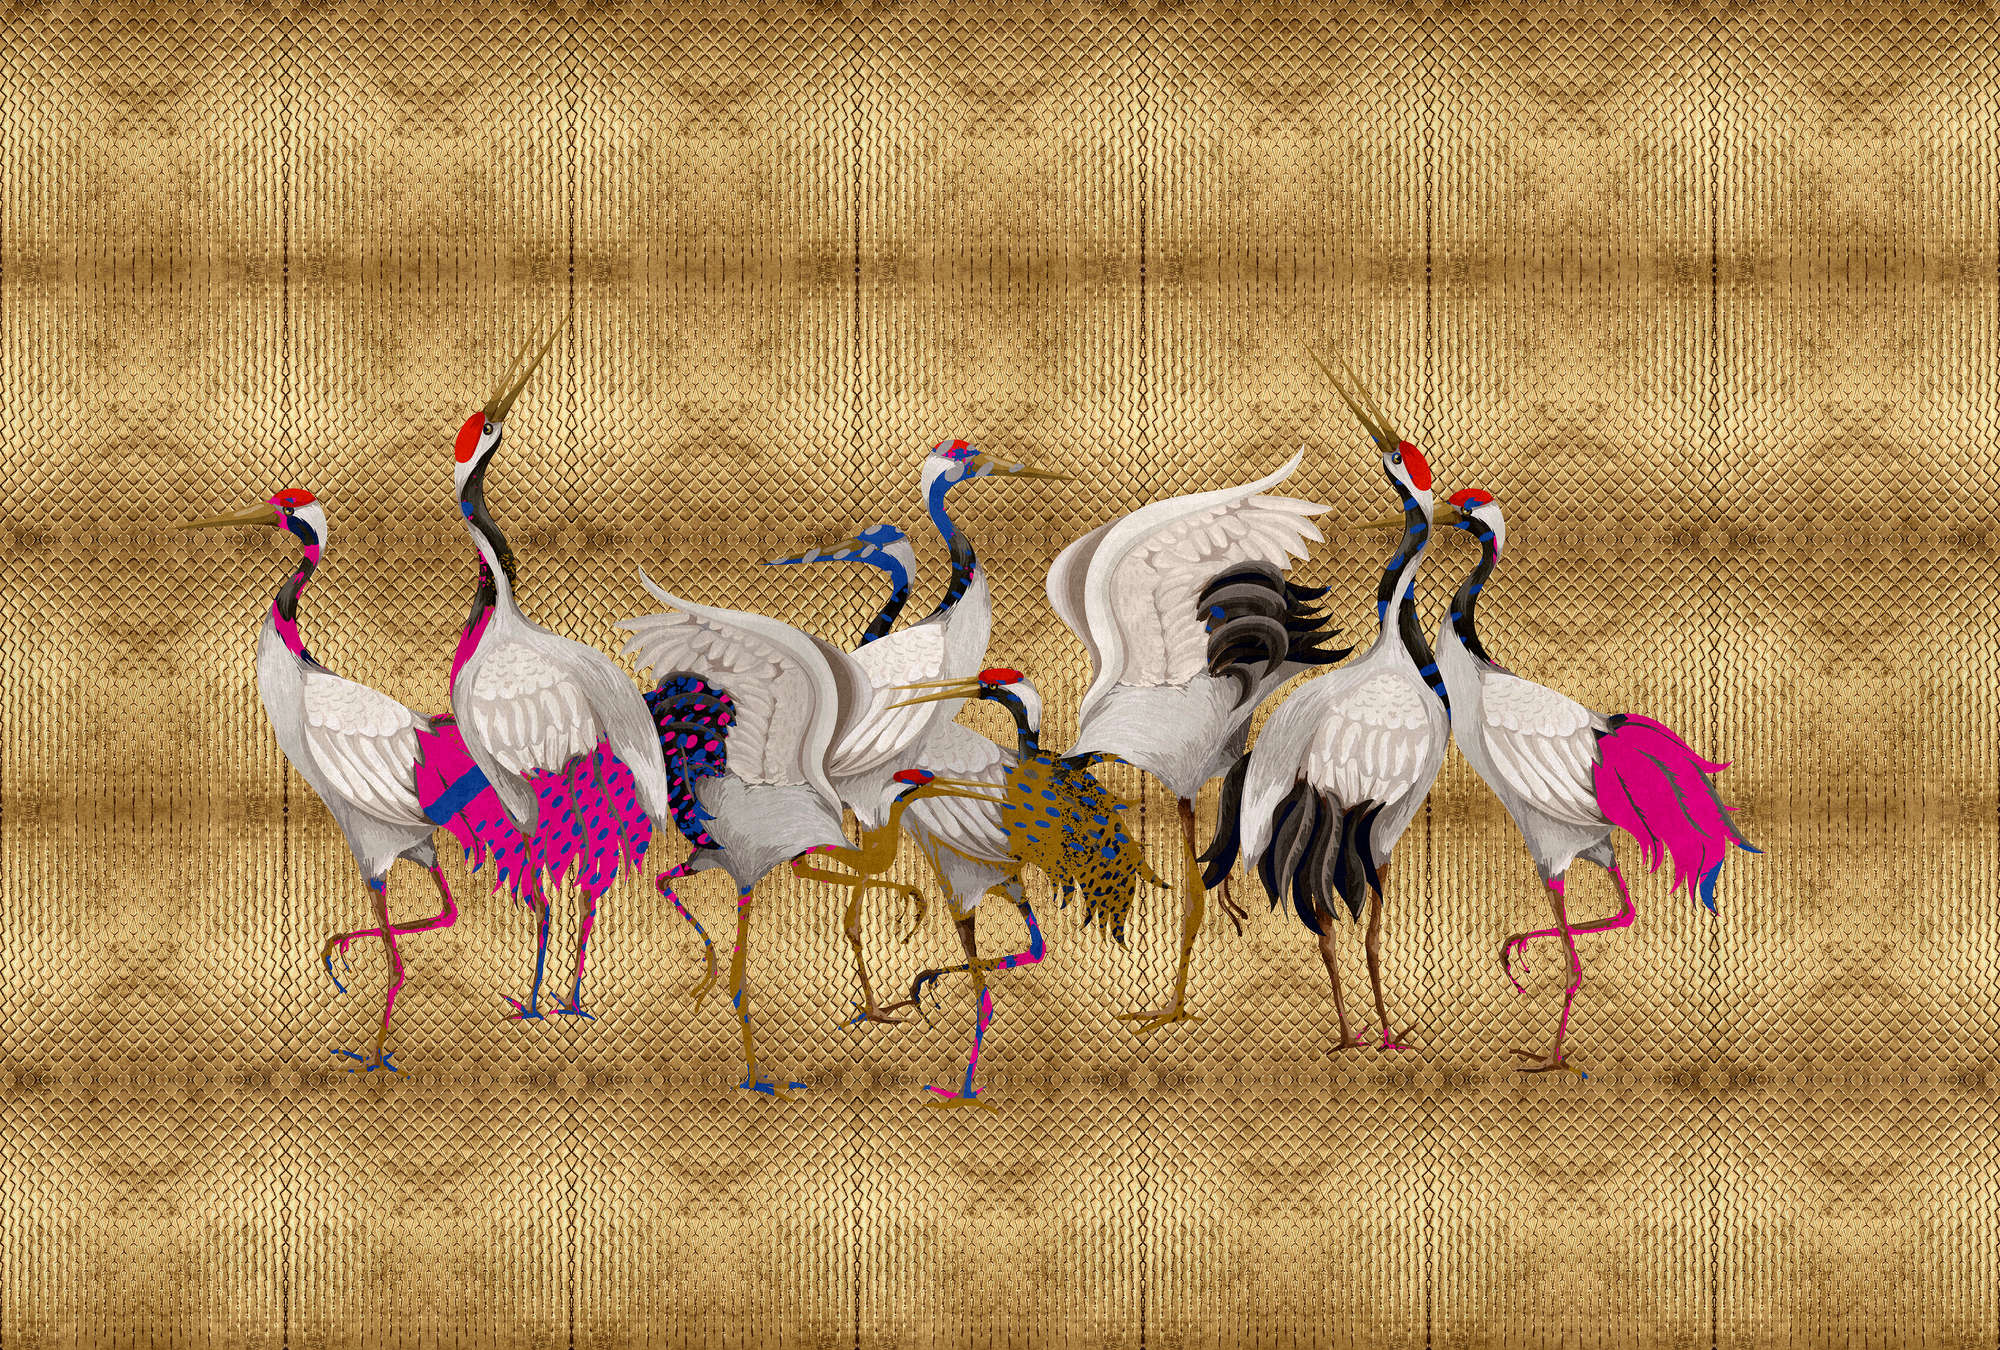             Land of Happiness 1 - Metallic wall mural gold with colourful crane motif
        